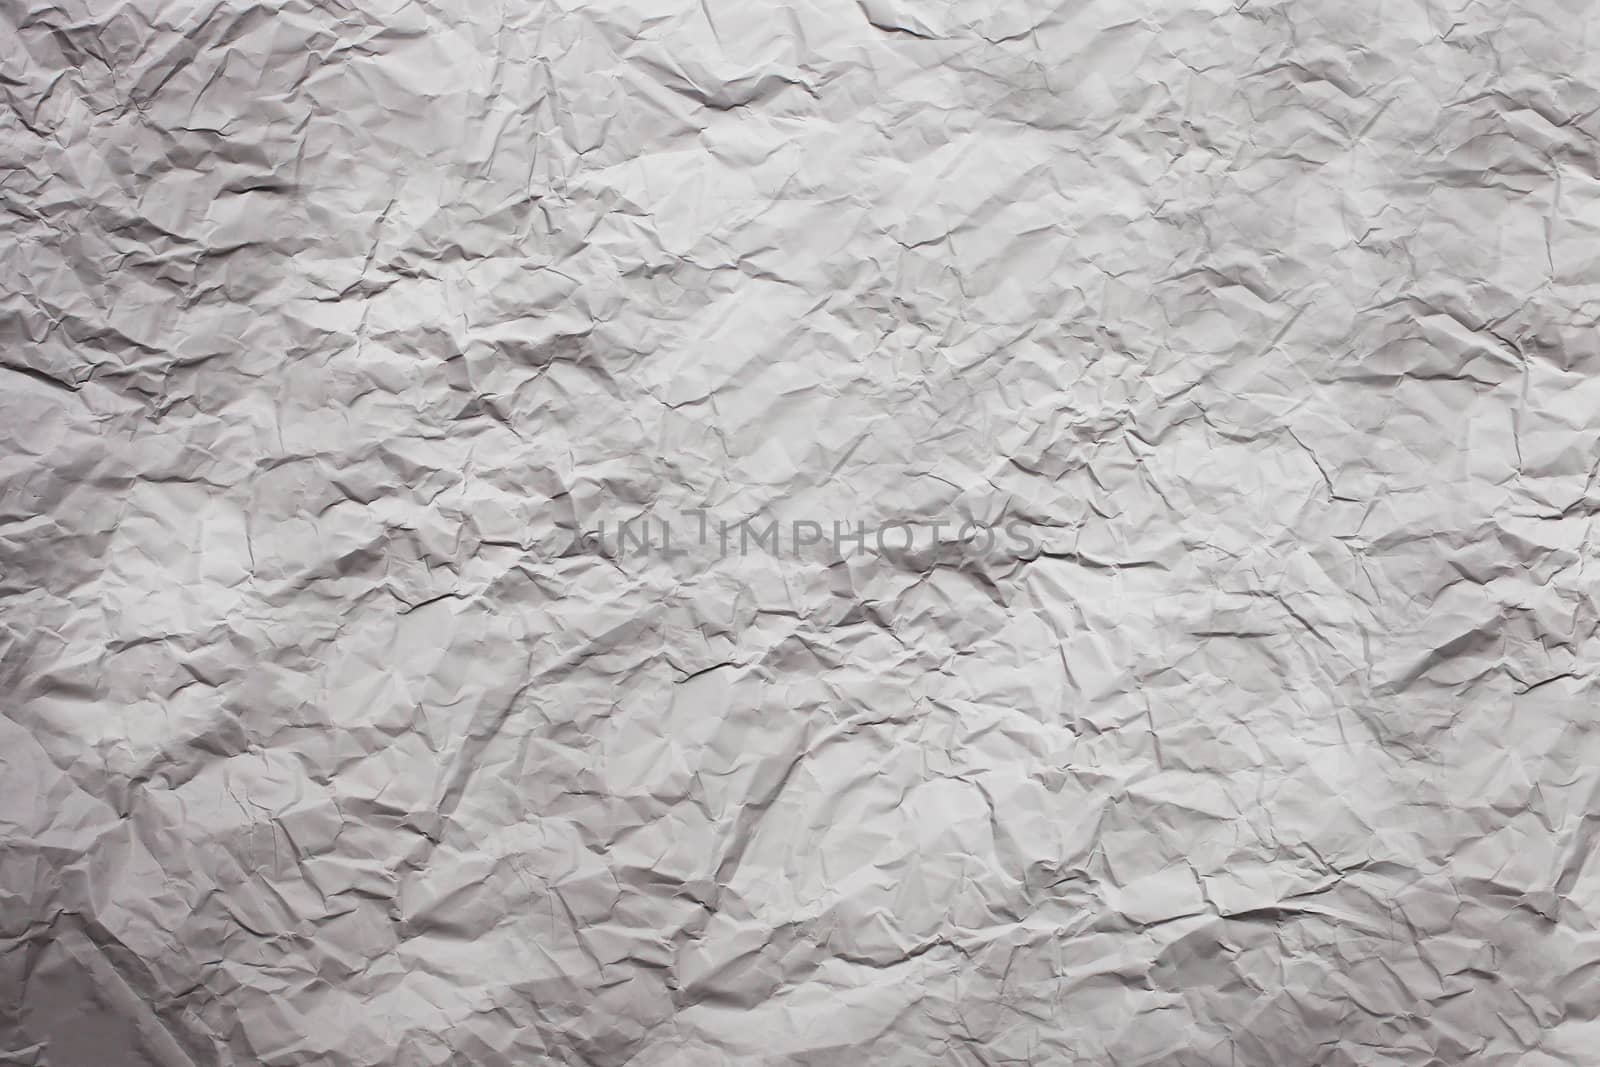 A clean sheet is strongly crumpled paper grey by Mastak80